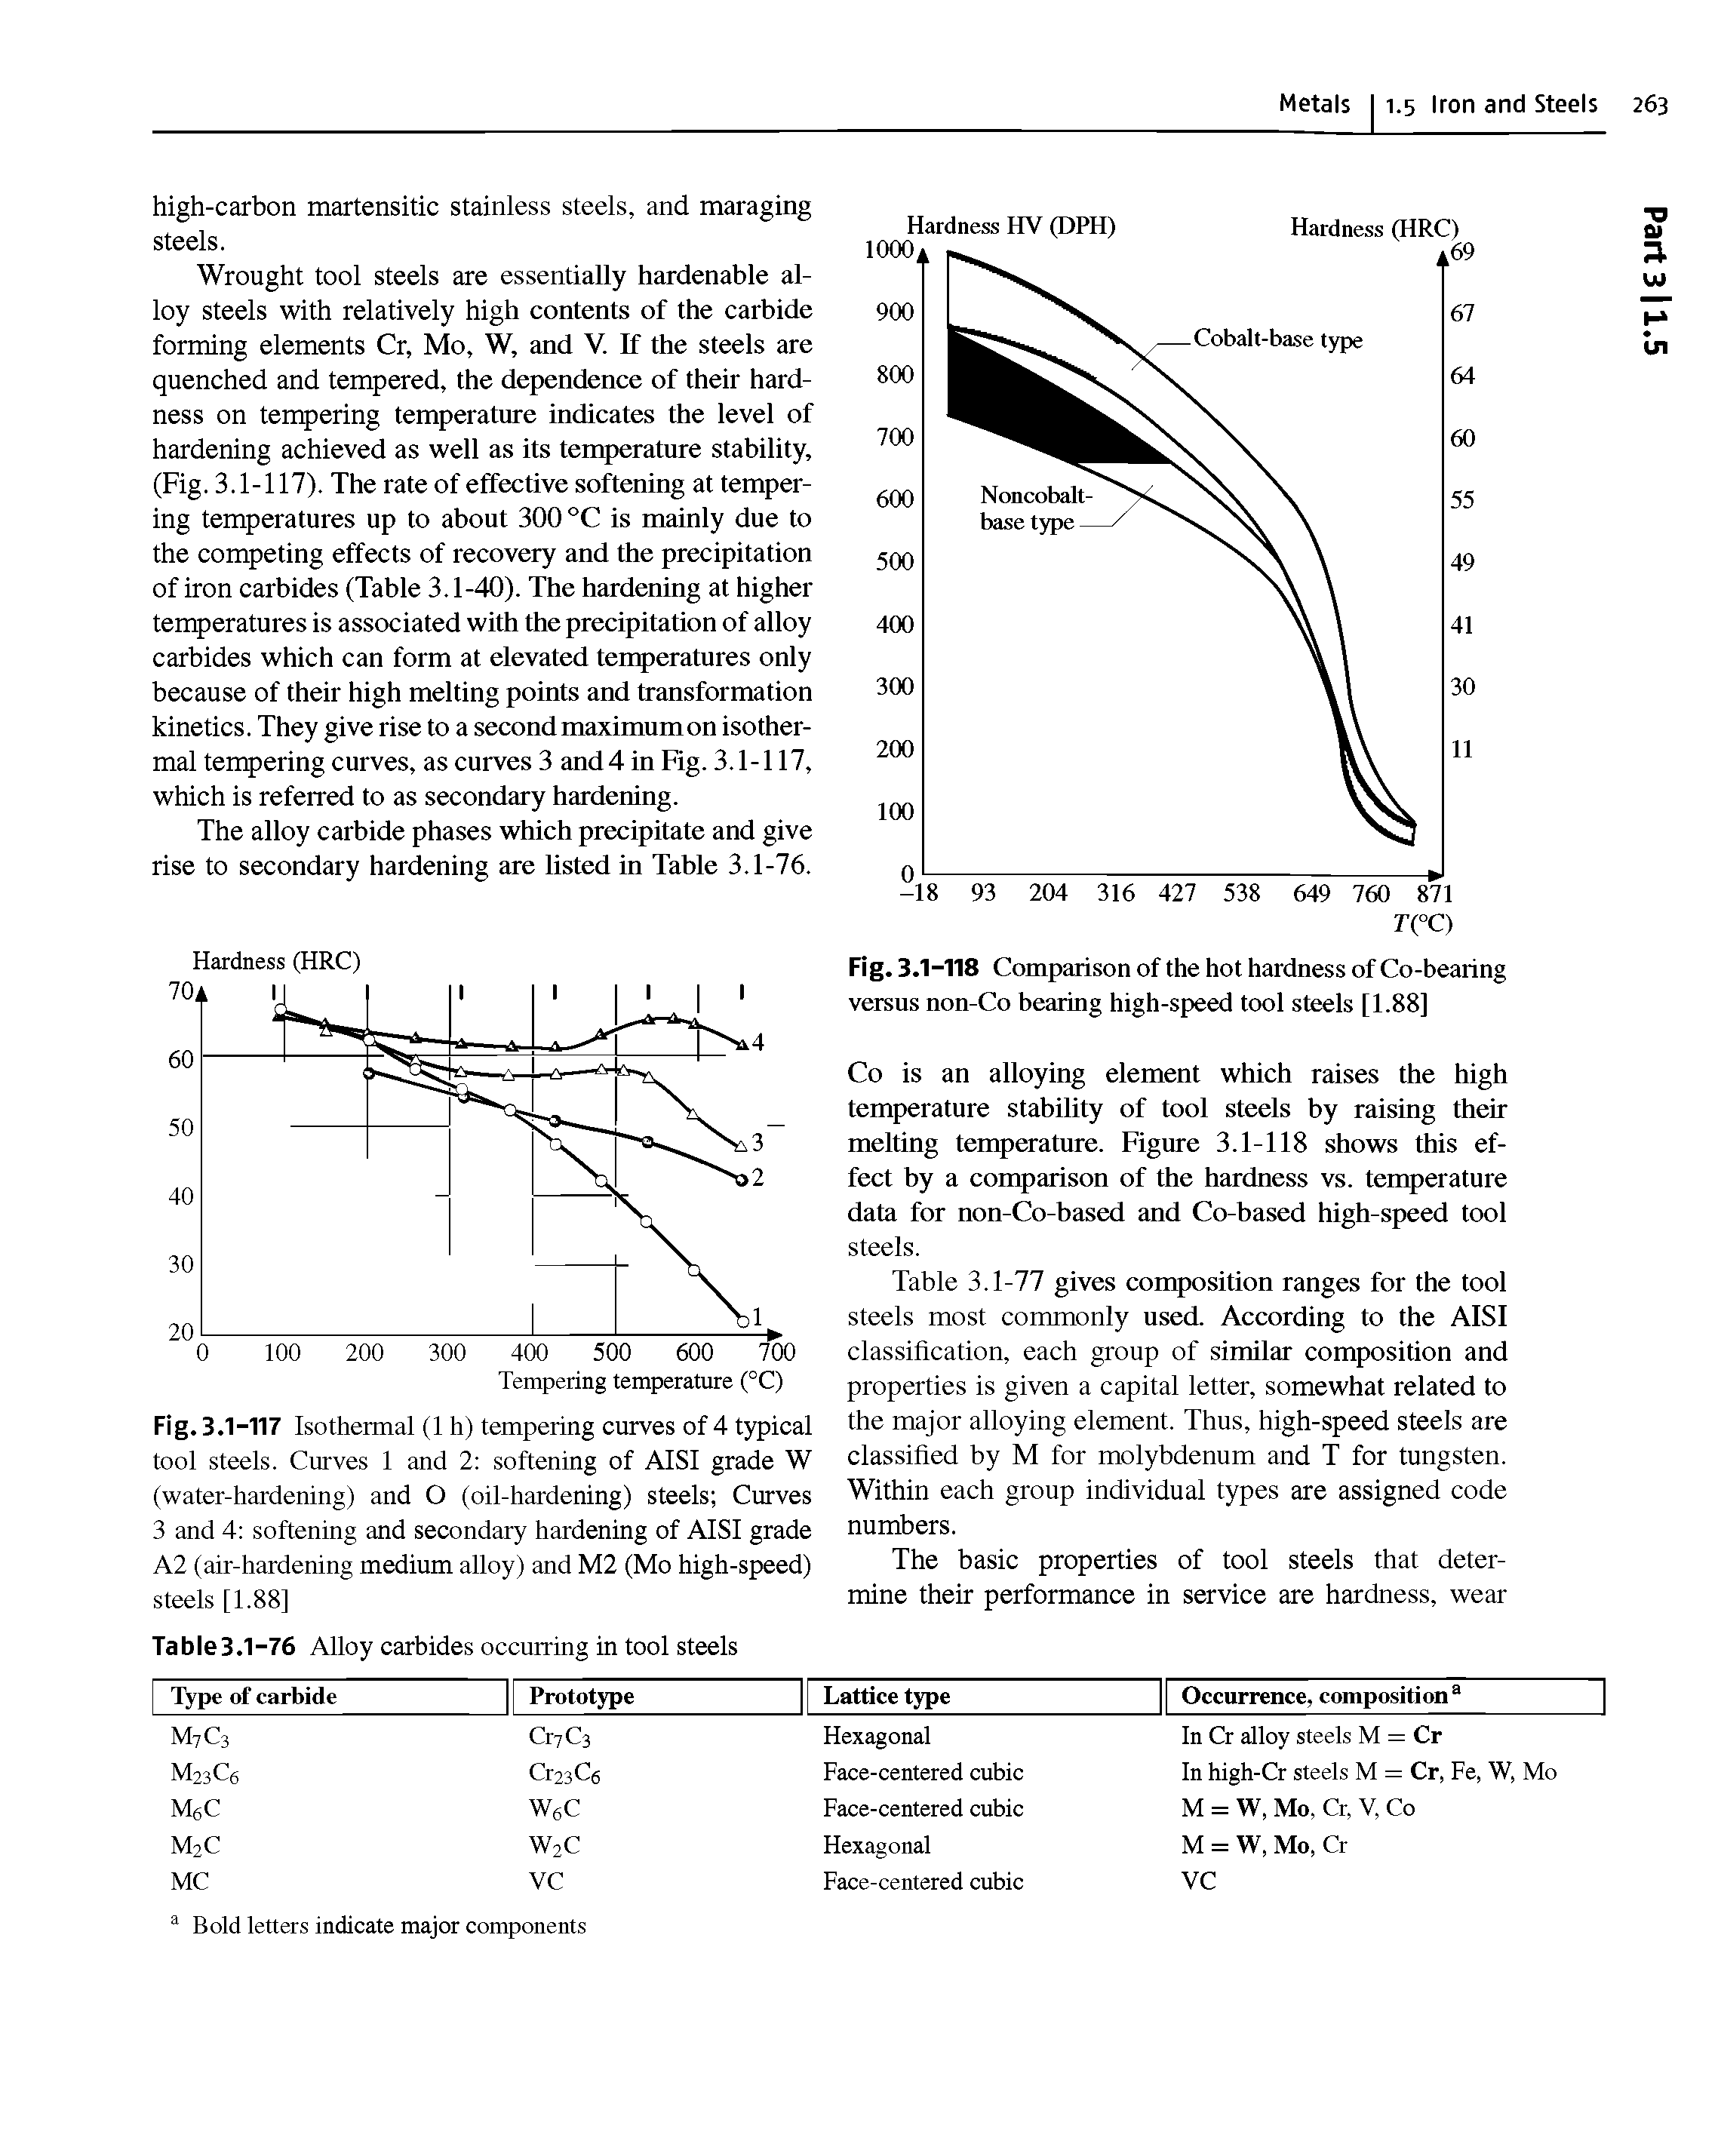 Fig. 3.1-117 Isothermal (1 h) tempering curves of 4 typical tool steels. Curves 1 and 2 softening of AISI grade W (water-hardening) and O (oil-hardening) steels Curves 3 and 4 softening and secondary hardening of AISI grade A2 (air-hardening medium alloy) and M2 (Mo high-speed) steels [1.88]...